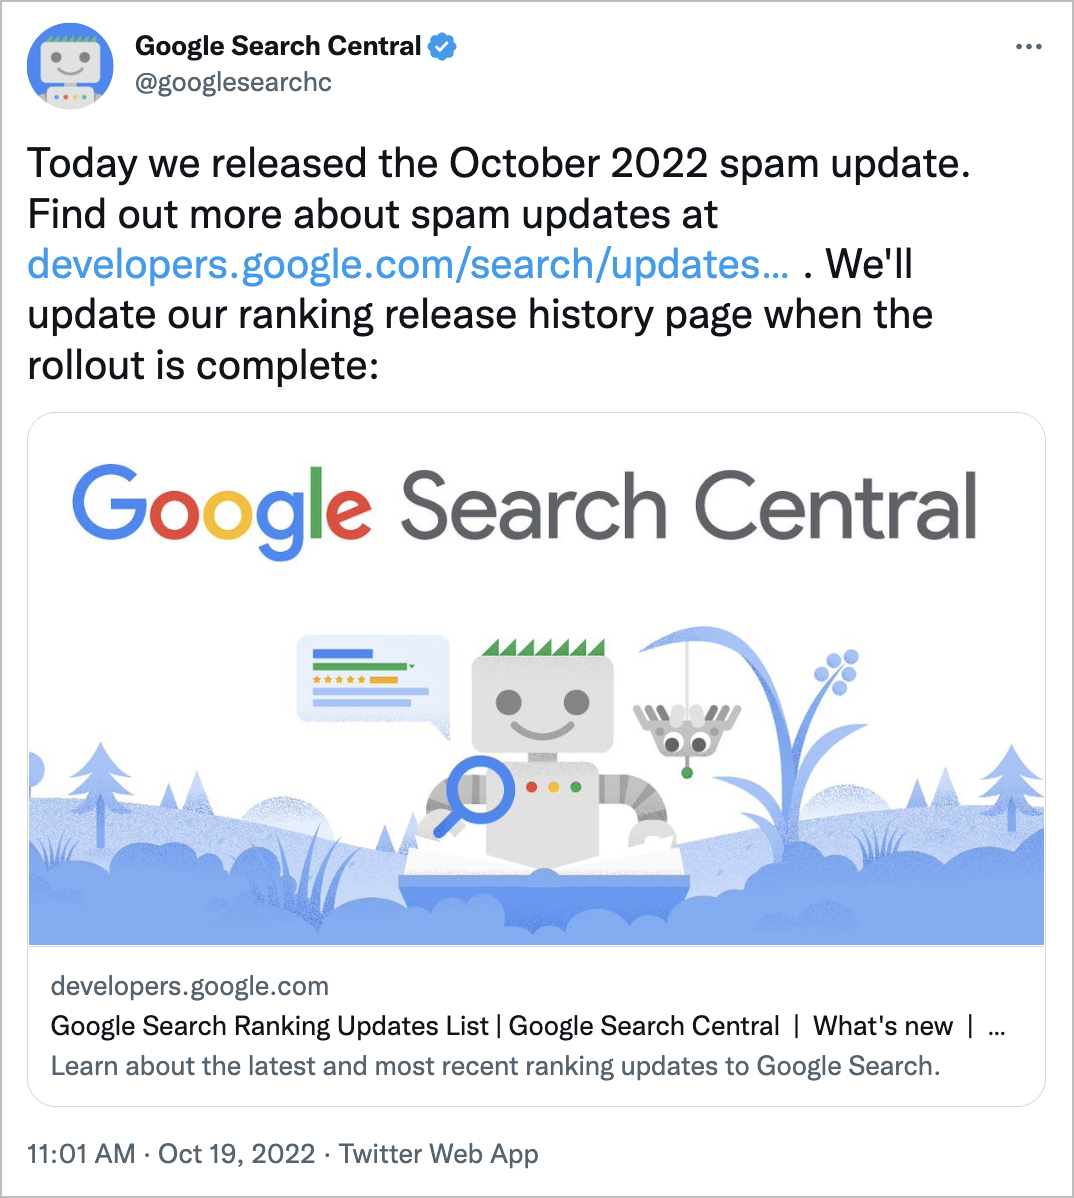 Google October 2022 Spam Announcement on Twitter